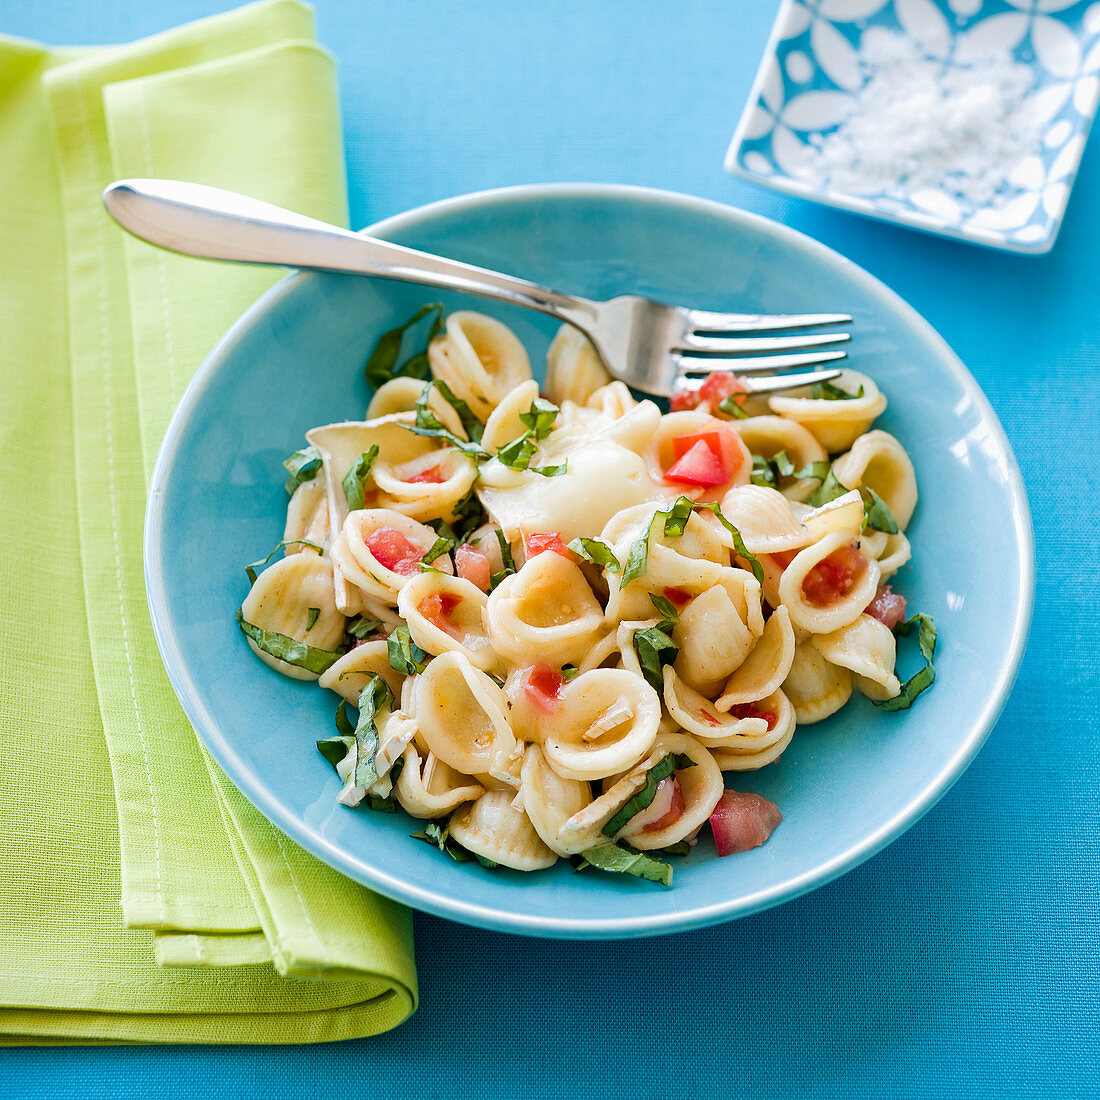 Orecchiette pasta salad with tomatoes and basil